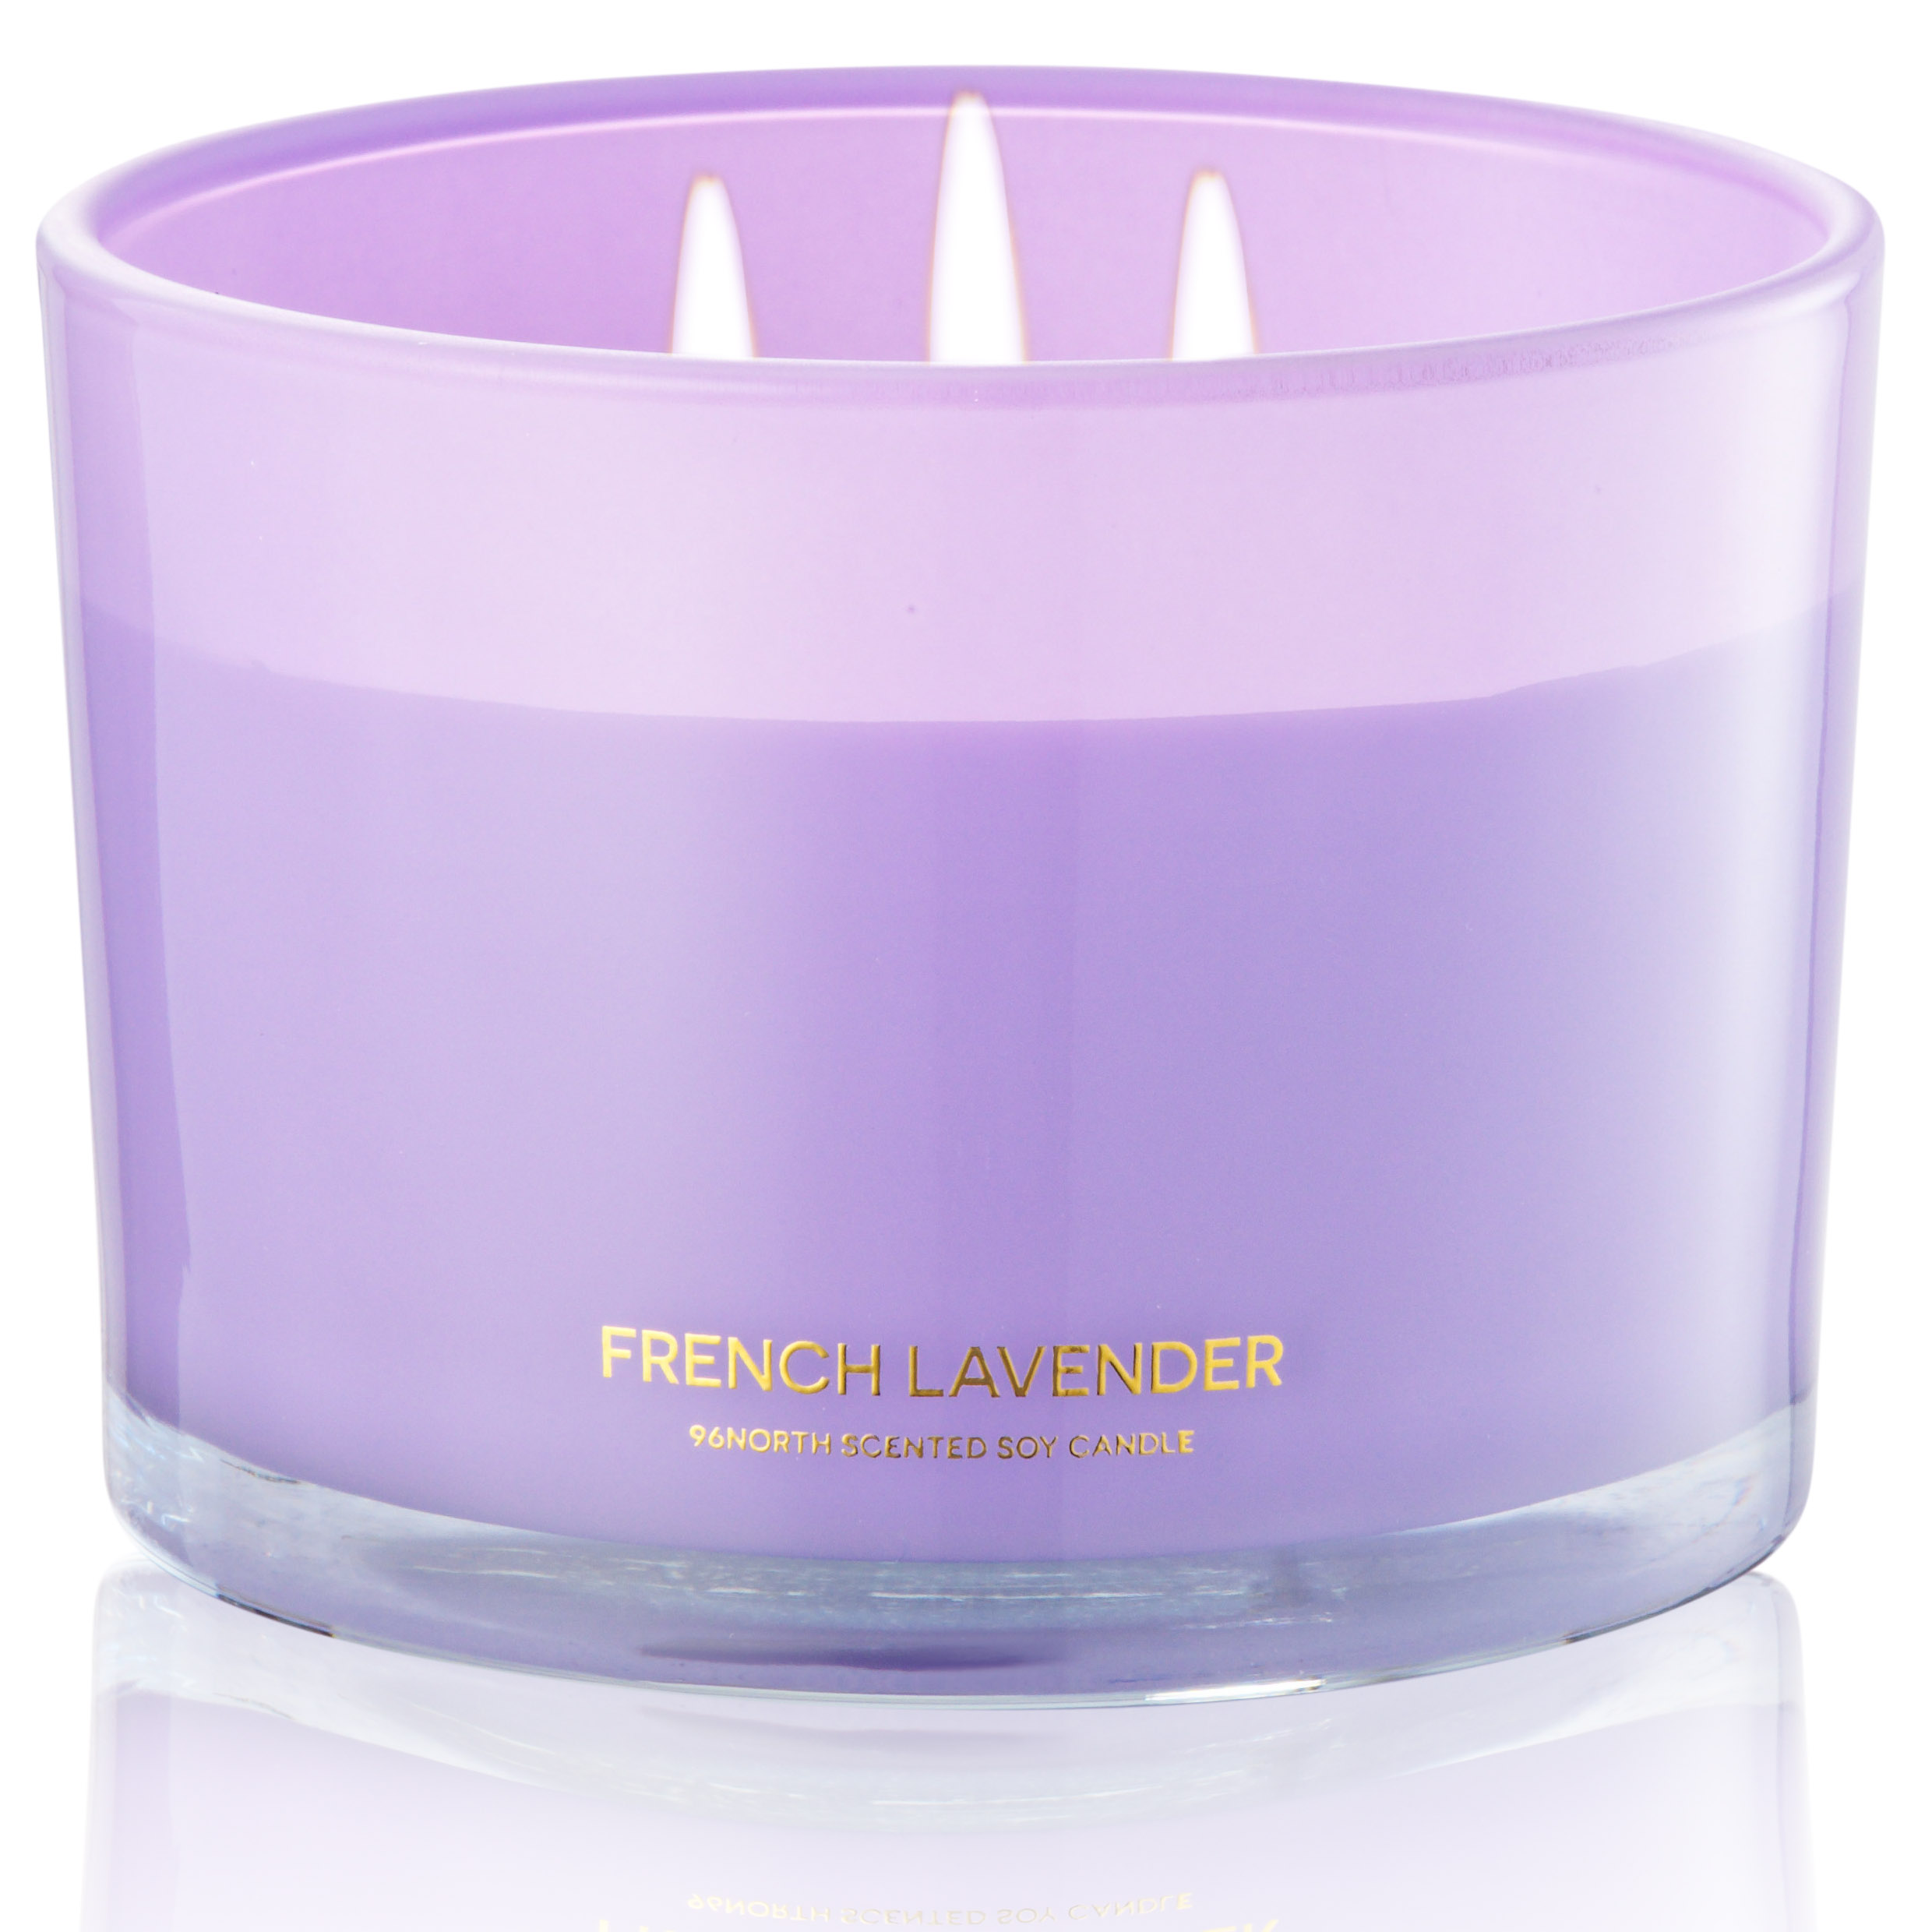 Lavender Scented Candles - 96NORTH